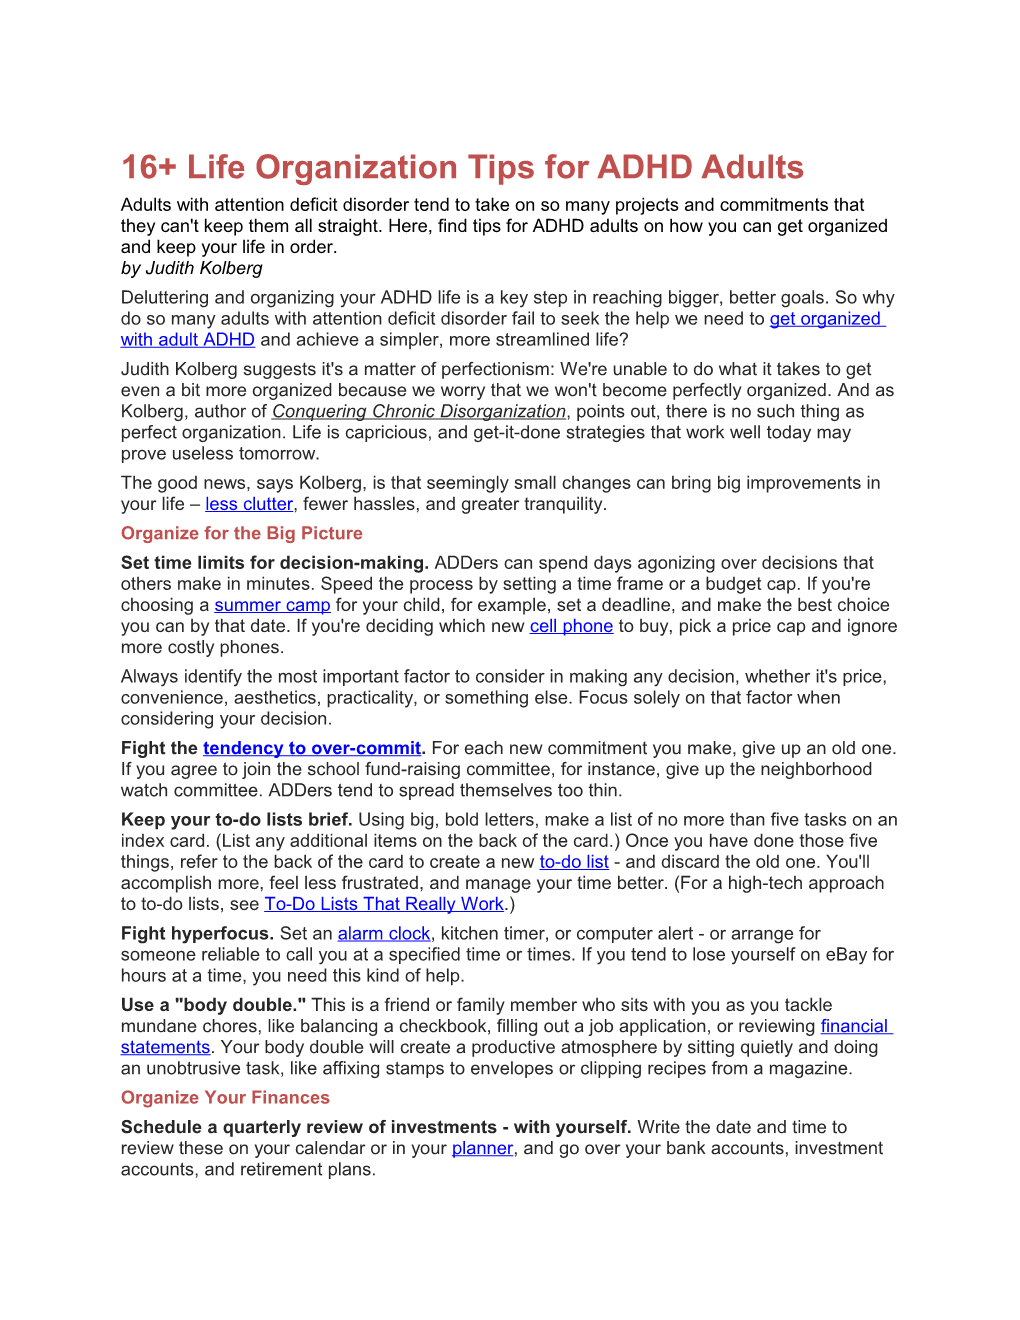 16+ Life Organization Tips for ADHD Adults